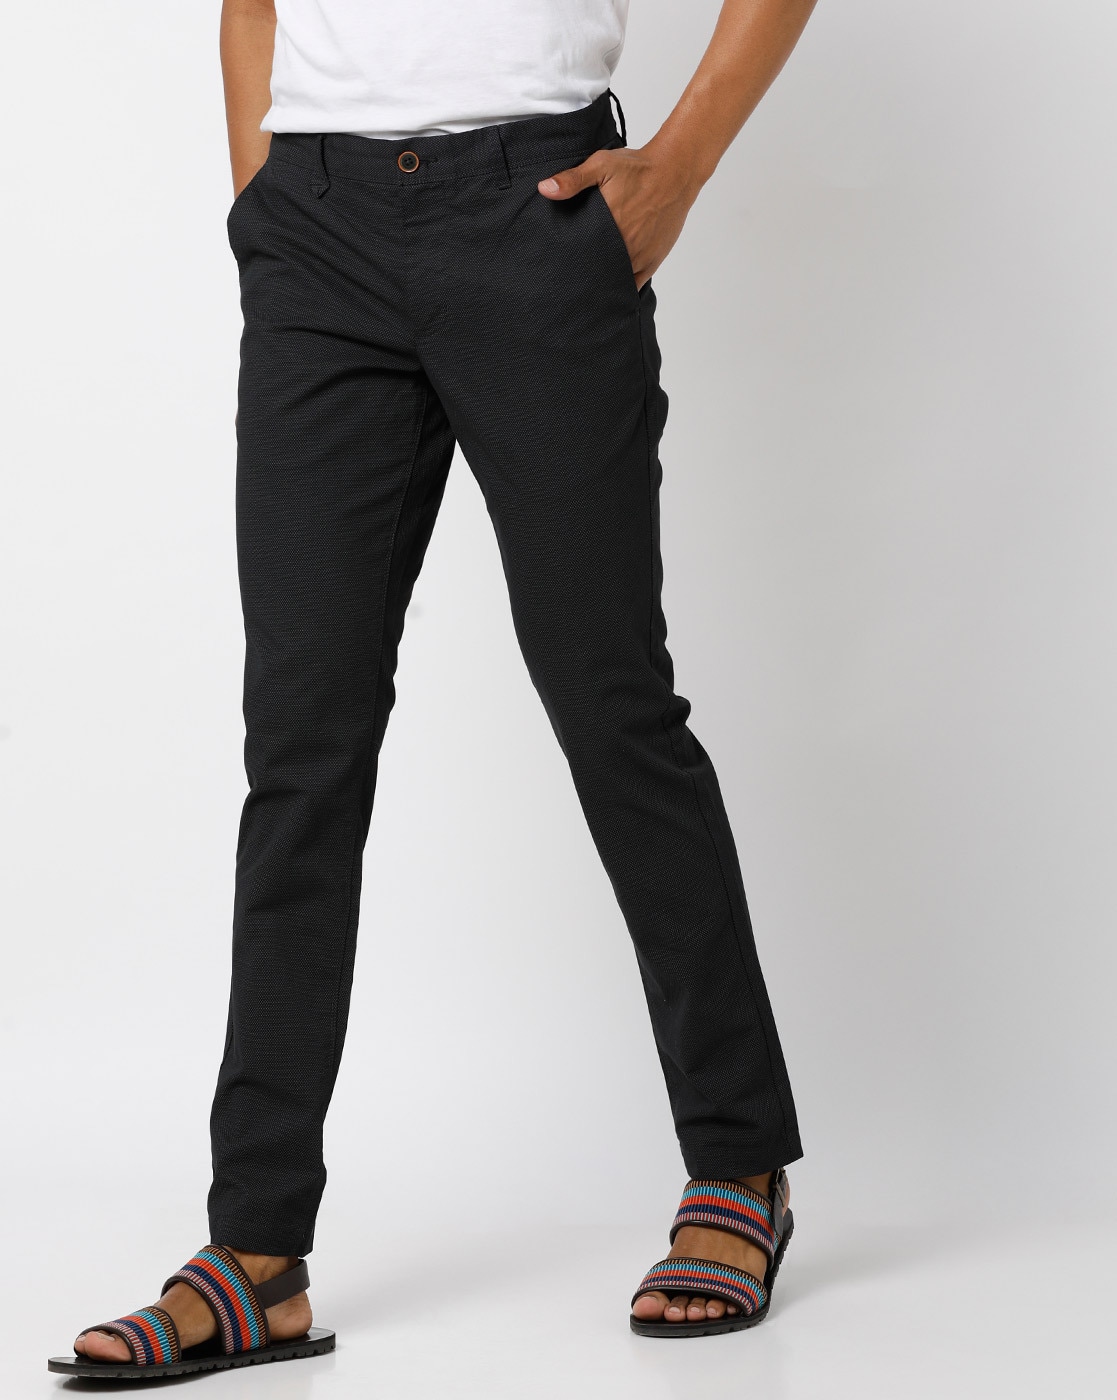 Indigo Nation Mens Trousers - Buy Indigo Nation Mens Trousers Online at  Best Prices In India | Flipkart.com